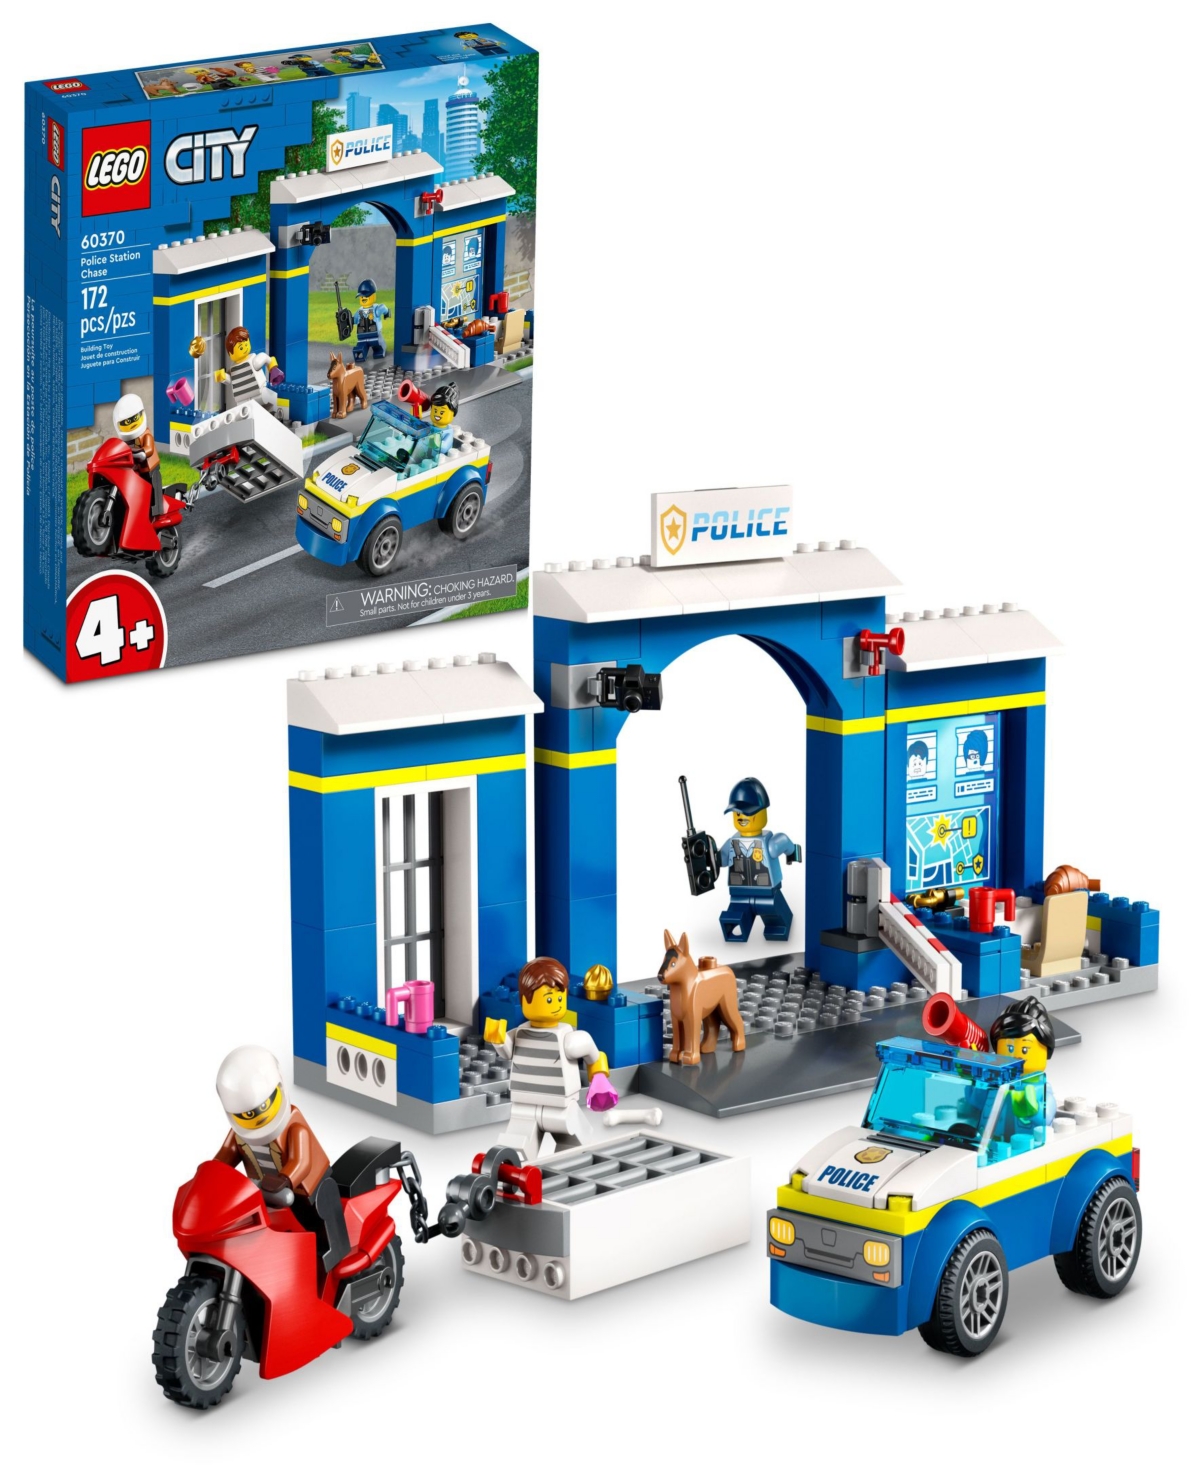 Lego City Police Station Chase 60370 Toy Building Set With 2 Police And 2 Crook Minifigures And Police Do In Multicolor